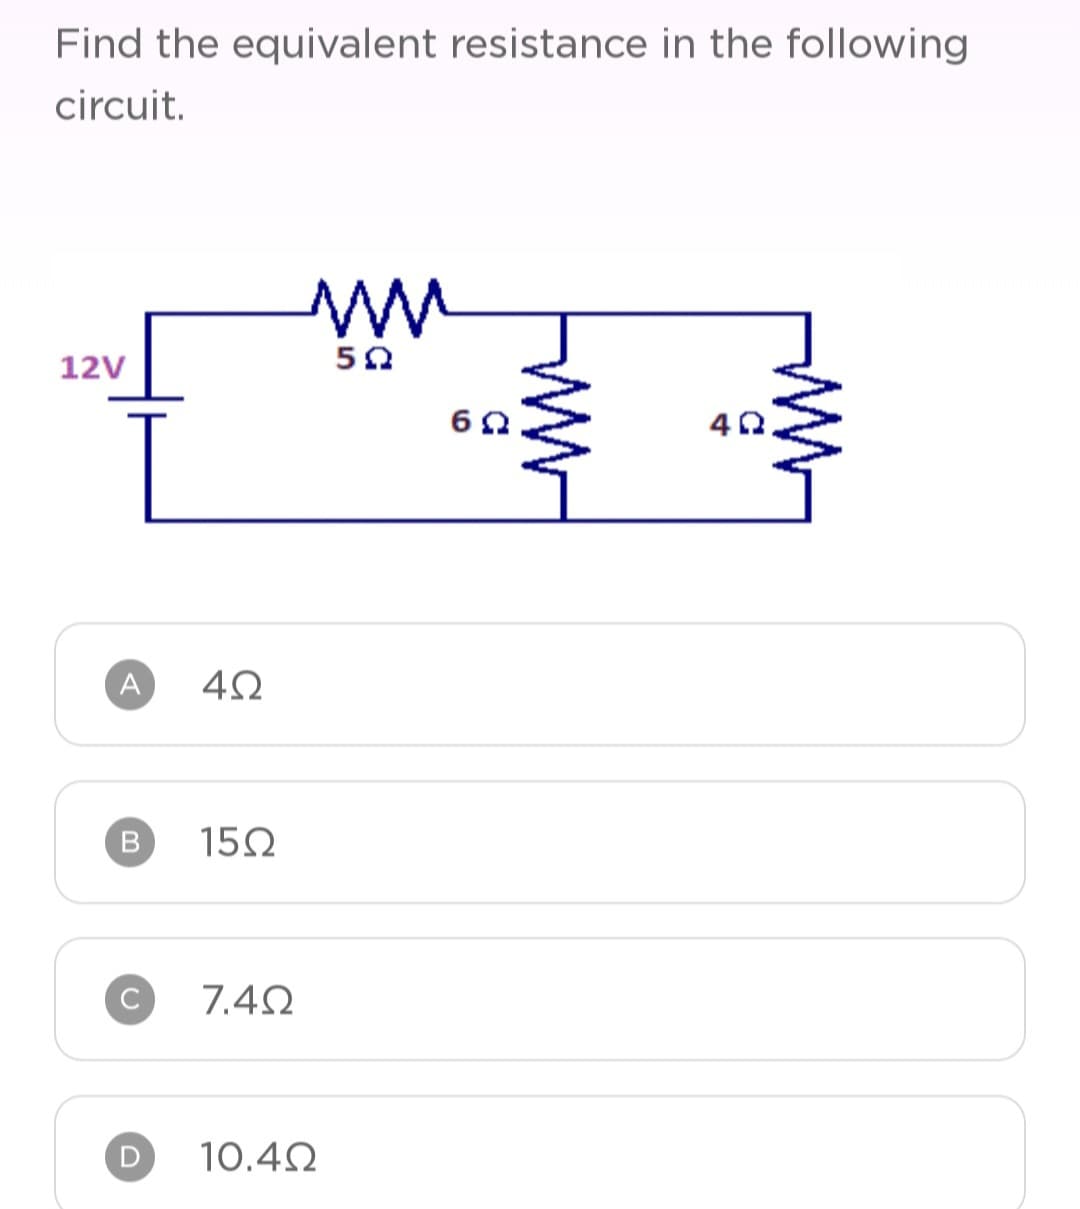 Find the equivalent resistance in the following
circuit.
12V
A
Β
C
4Ω
15Ω
7.4Ω
Μ
10.4Ω
50
6Ω